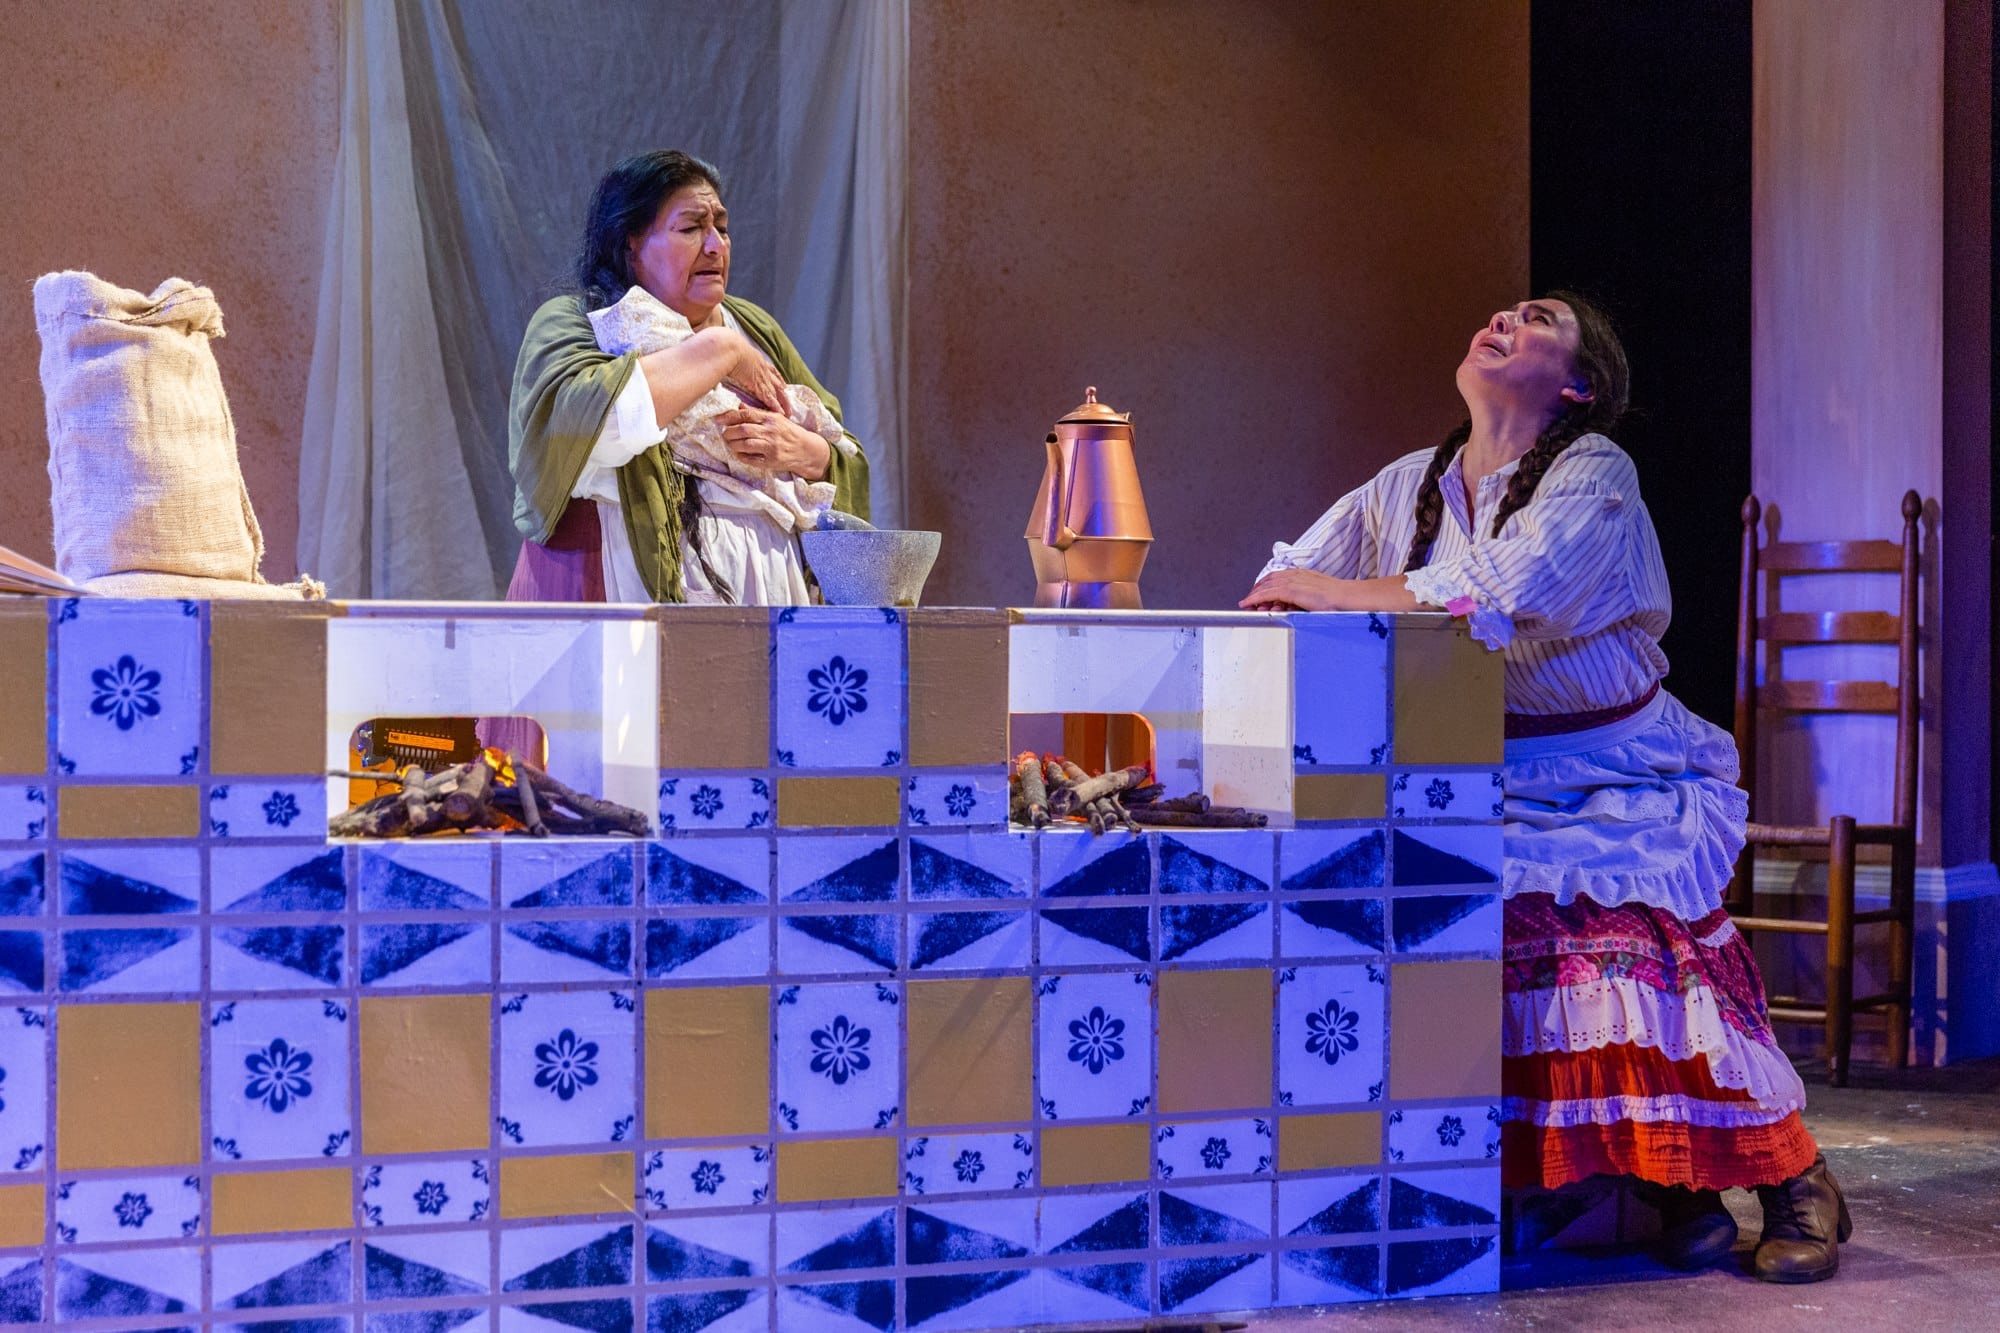 The U.S. premiere of Como Agua Para Chocolate (Like Water for Chocolate) plays through October 7, 2018, at GALA Hispanic Theatre. Photo by Daniel Martinez.